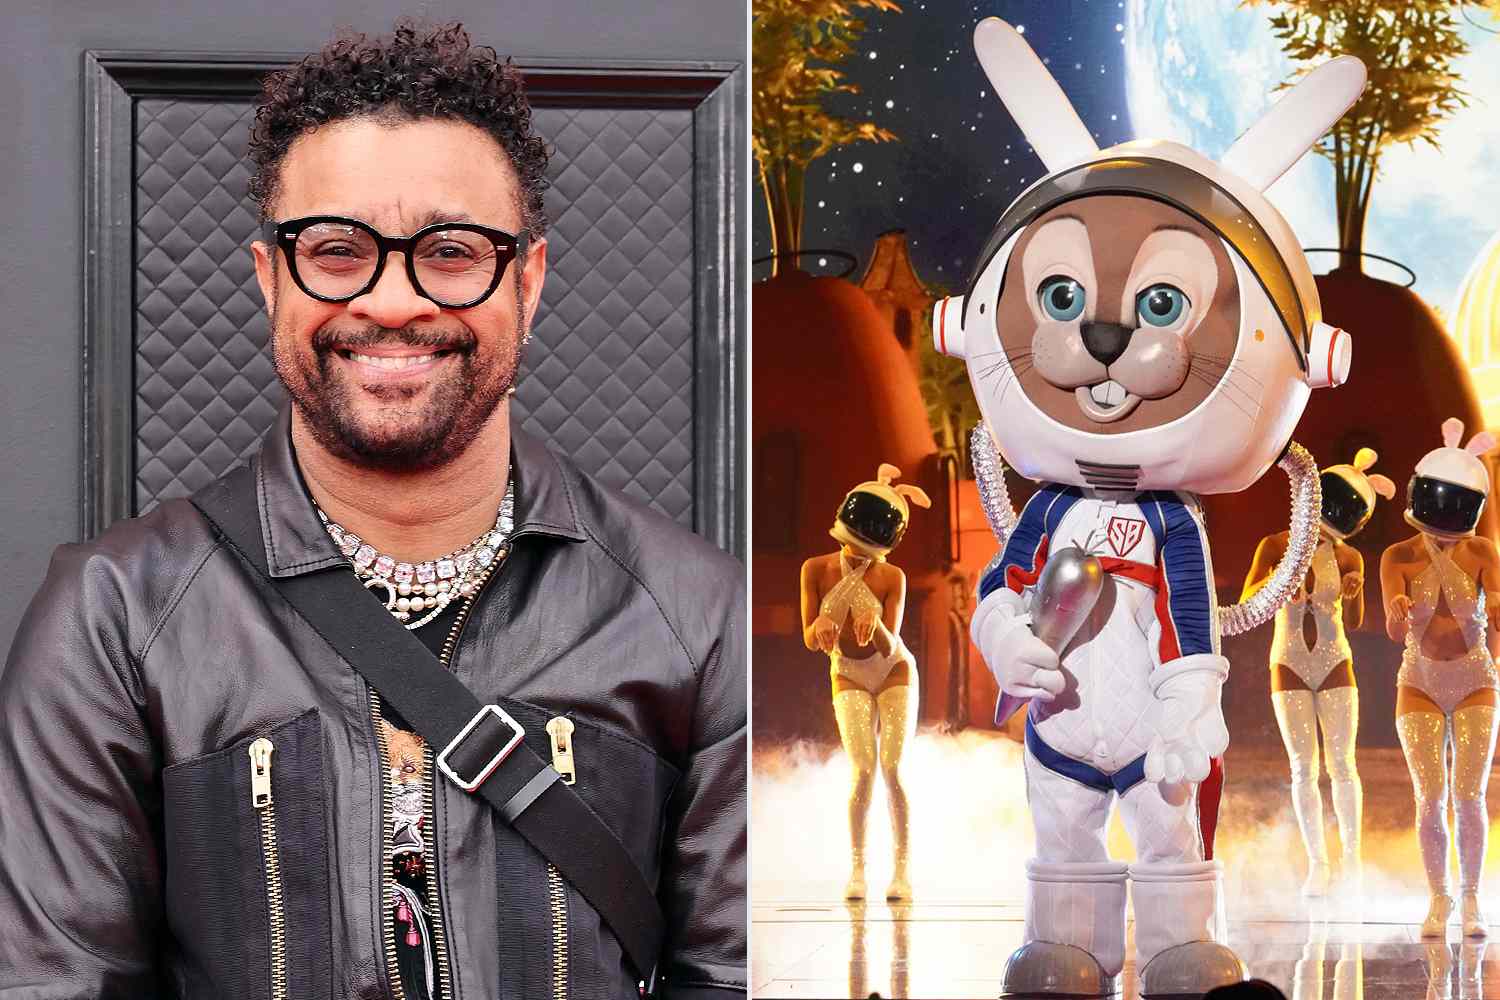 Shaggy, the masked singer